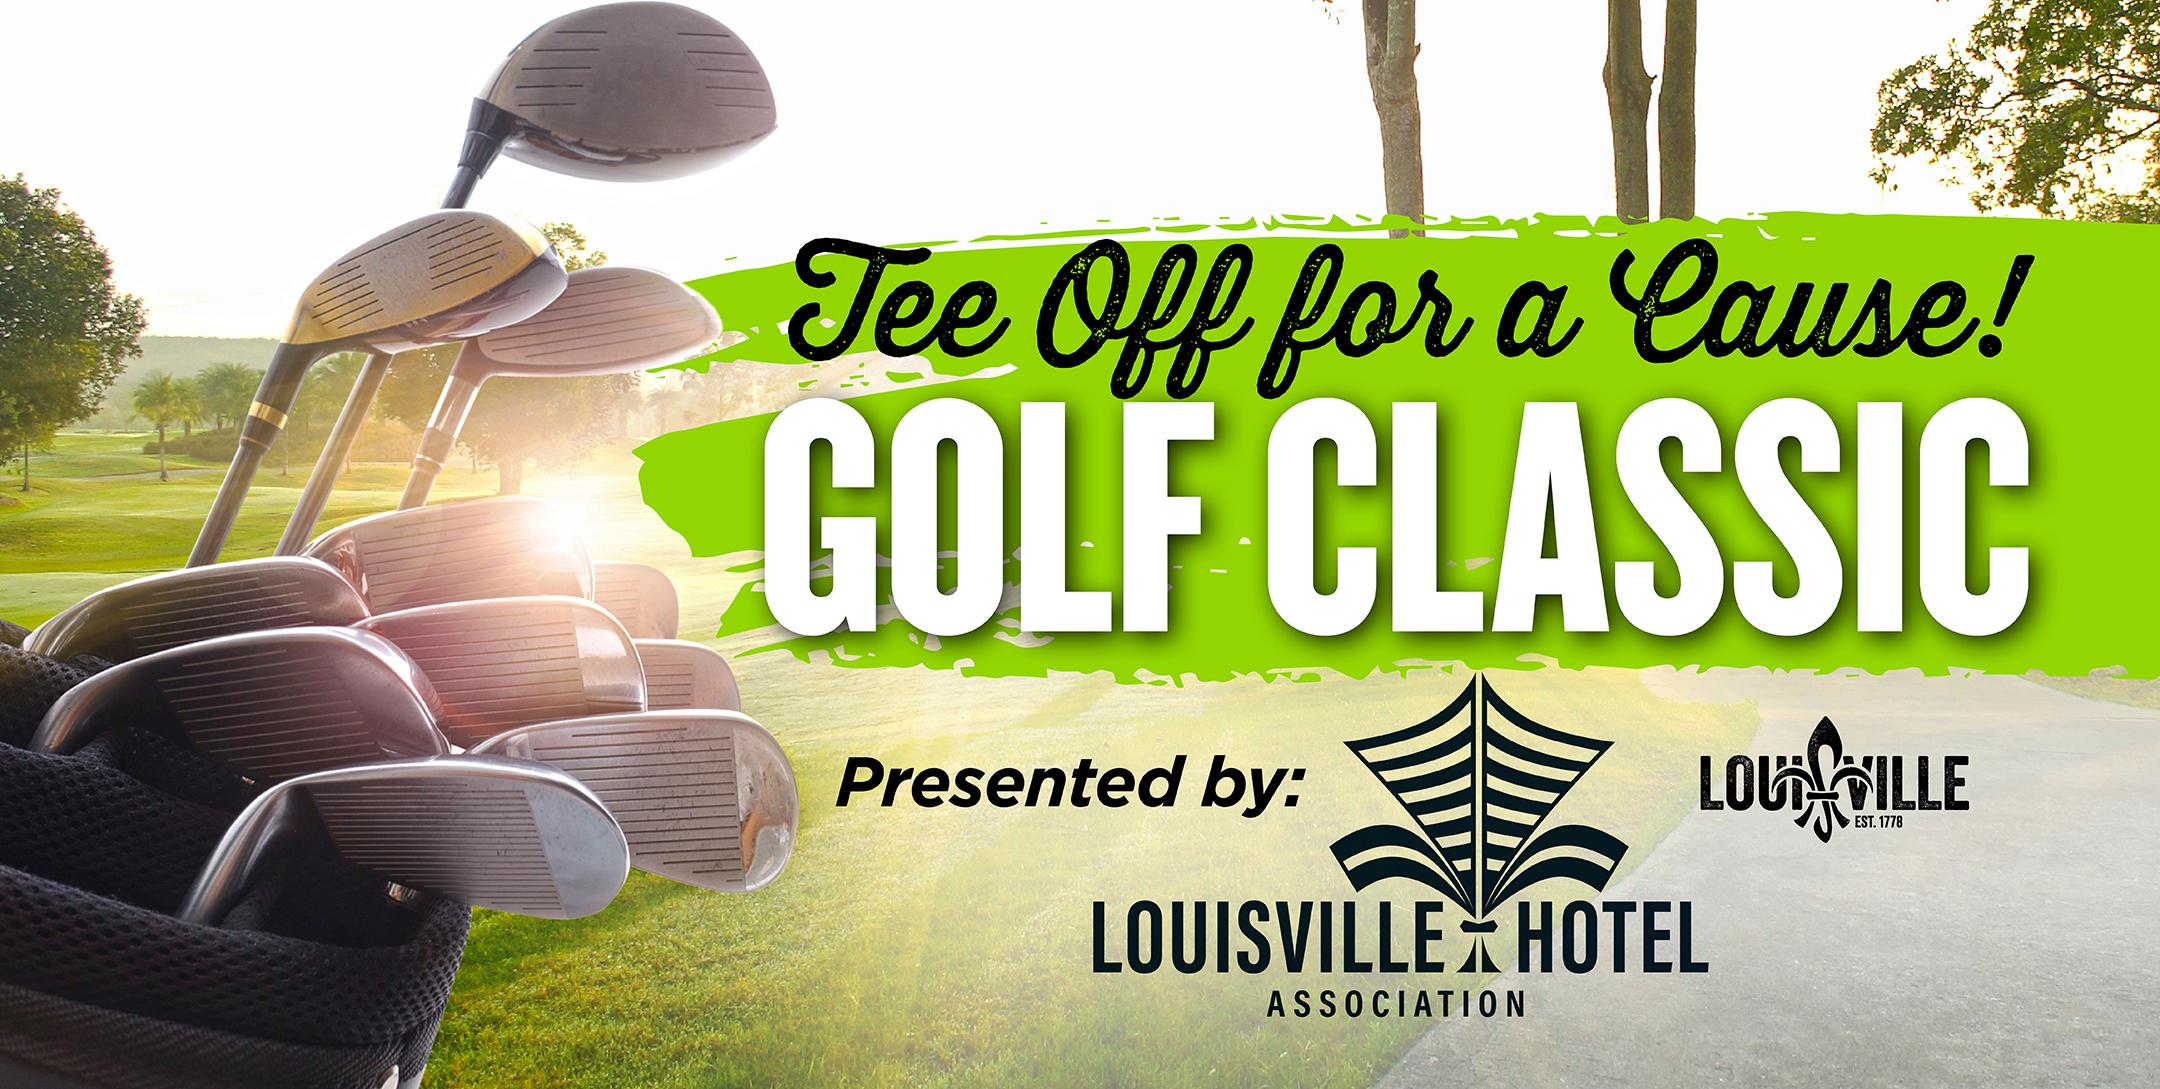 Golf Classic co-hosted by Louisville Hotel Association & Louisville Tourism